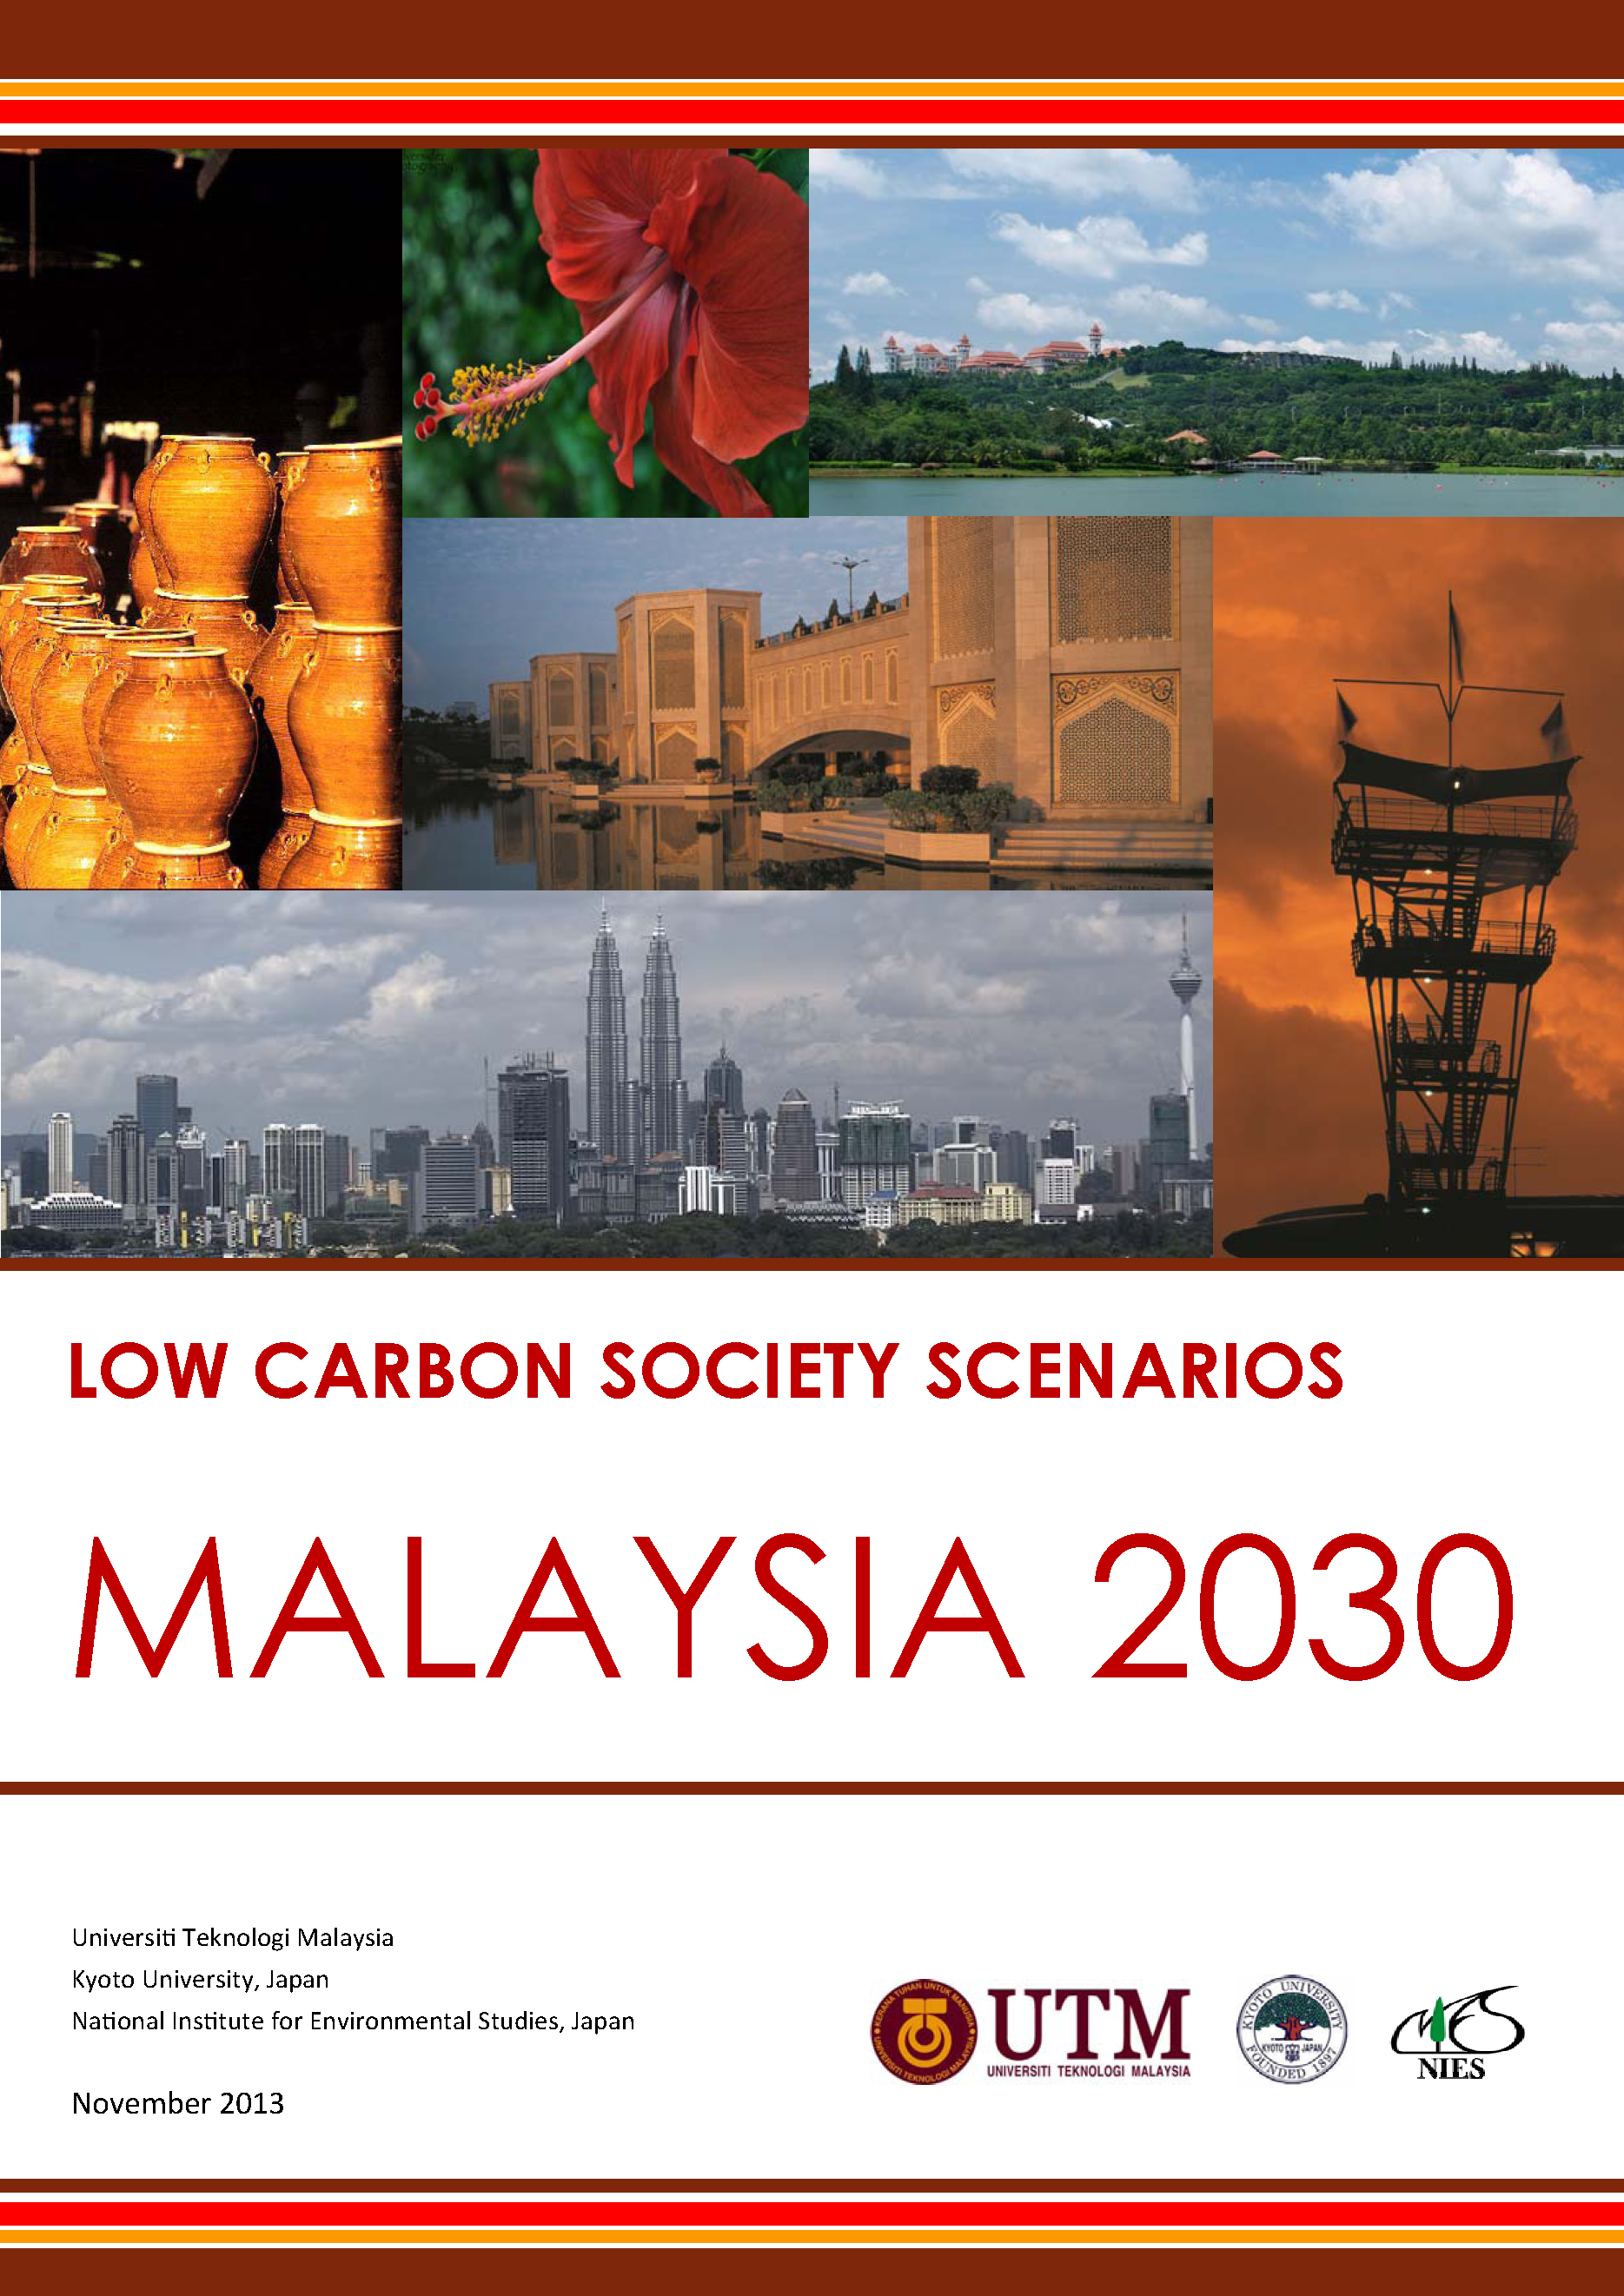 Sustainable Low-Carbon Society Towards 2030 in Vietnam